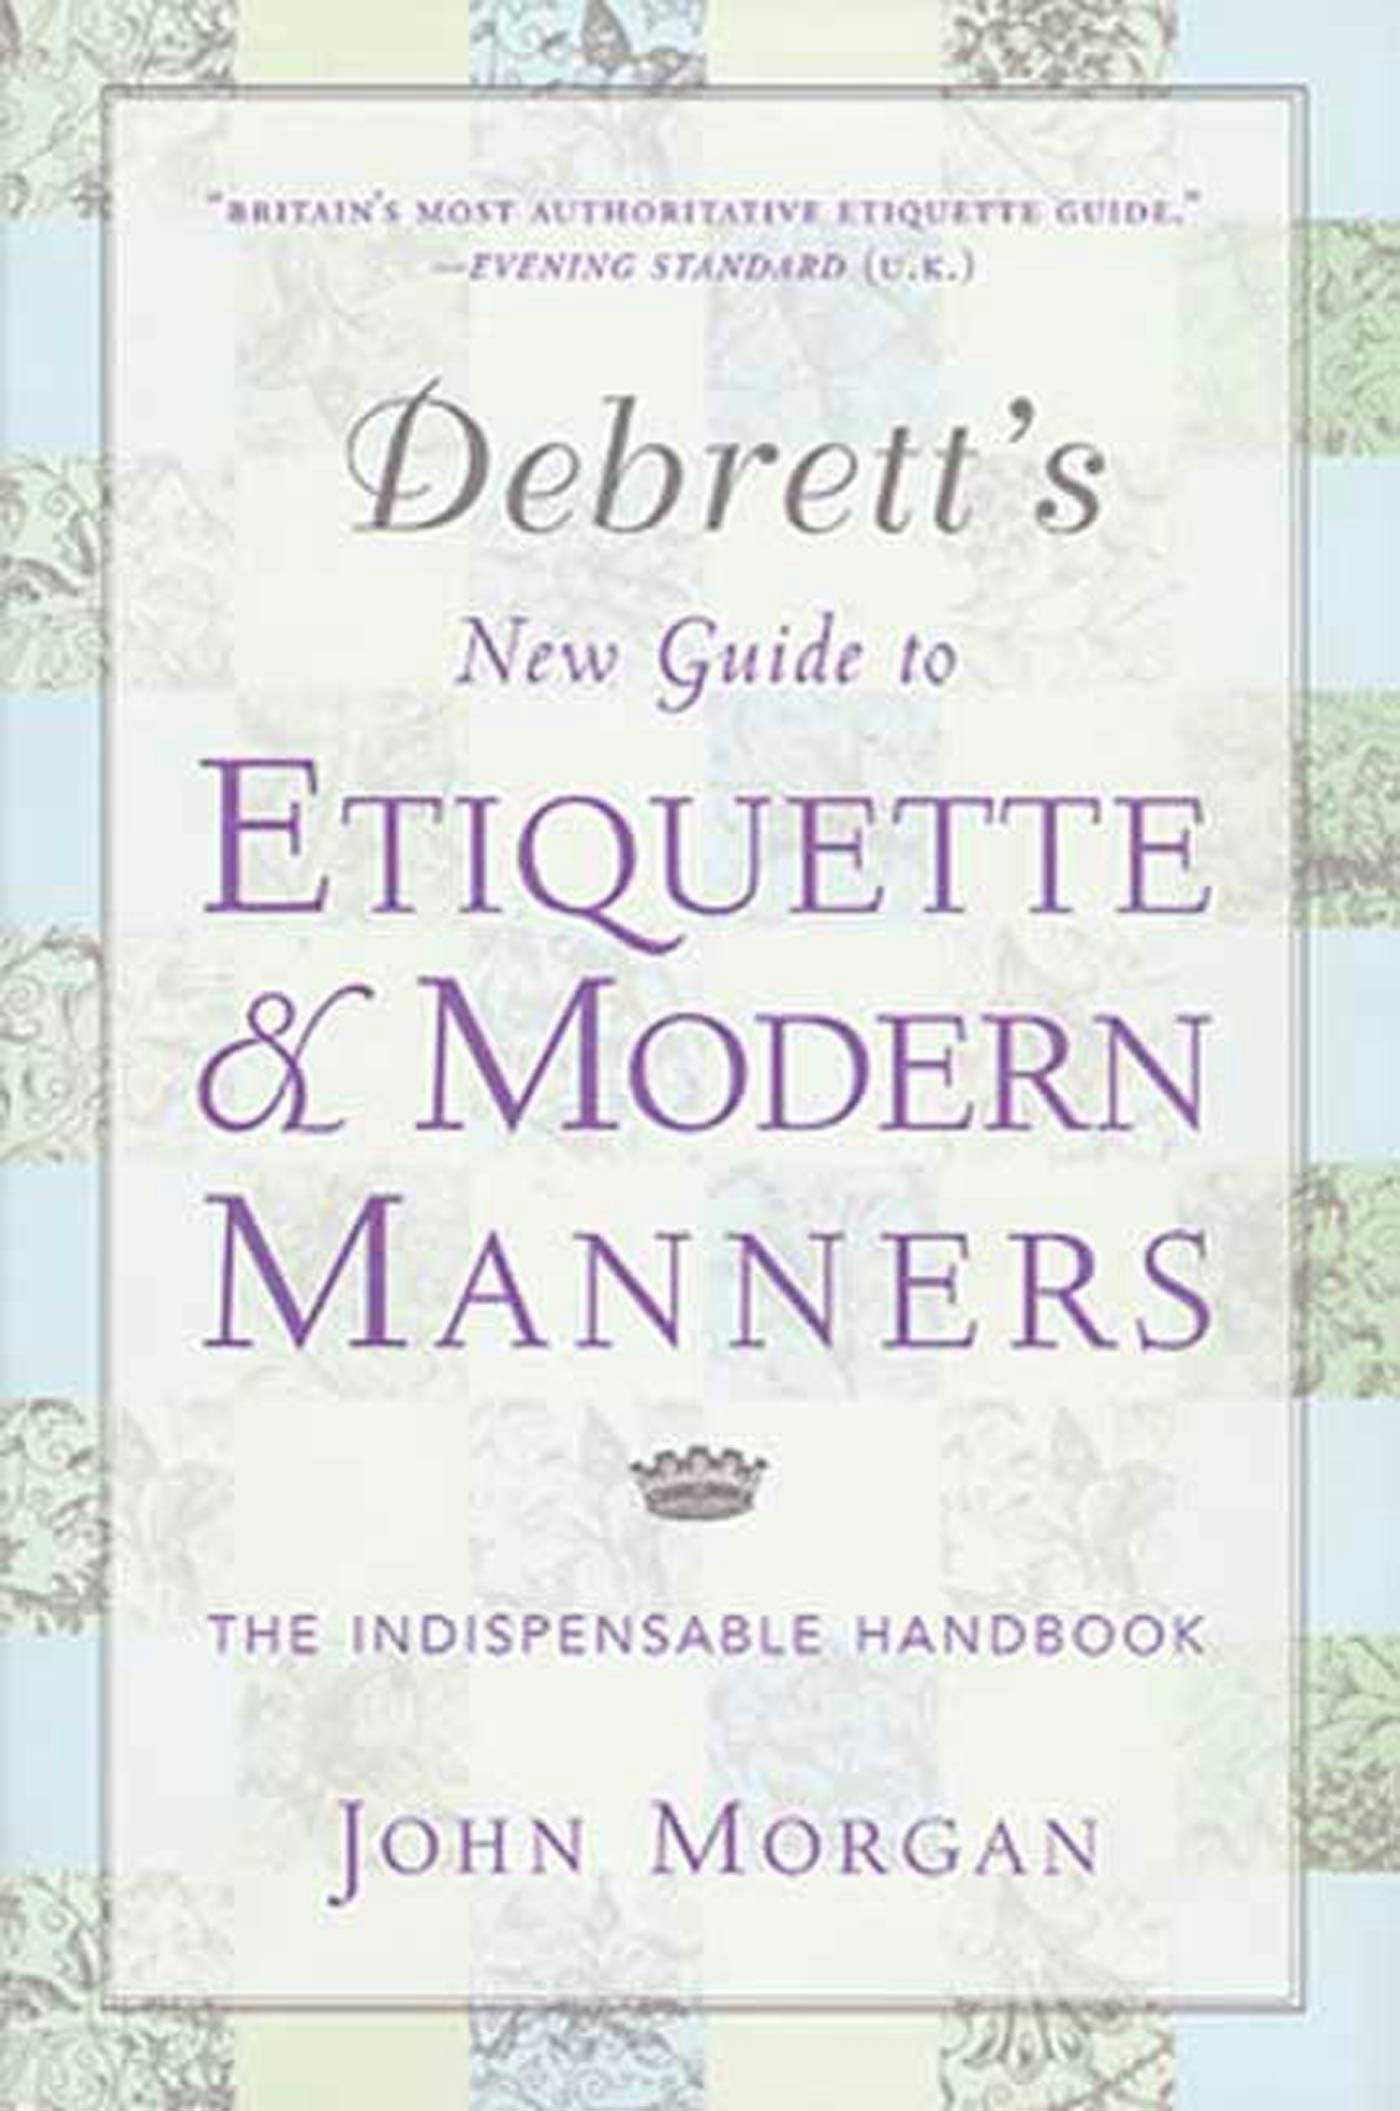 The Etiquette Book: A Complete Guide to Modern Manners